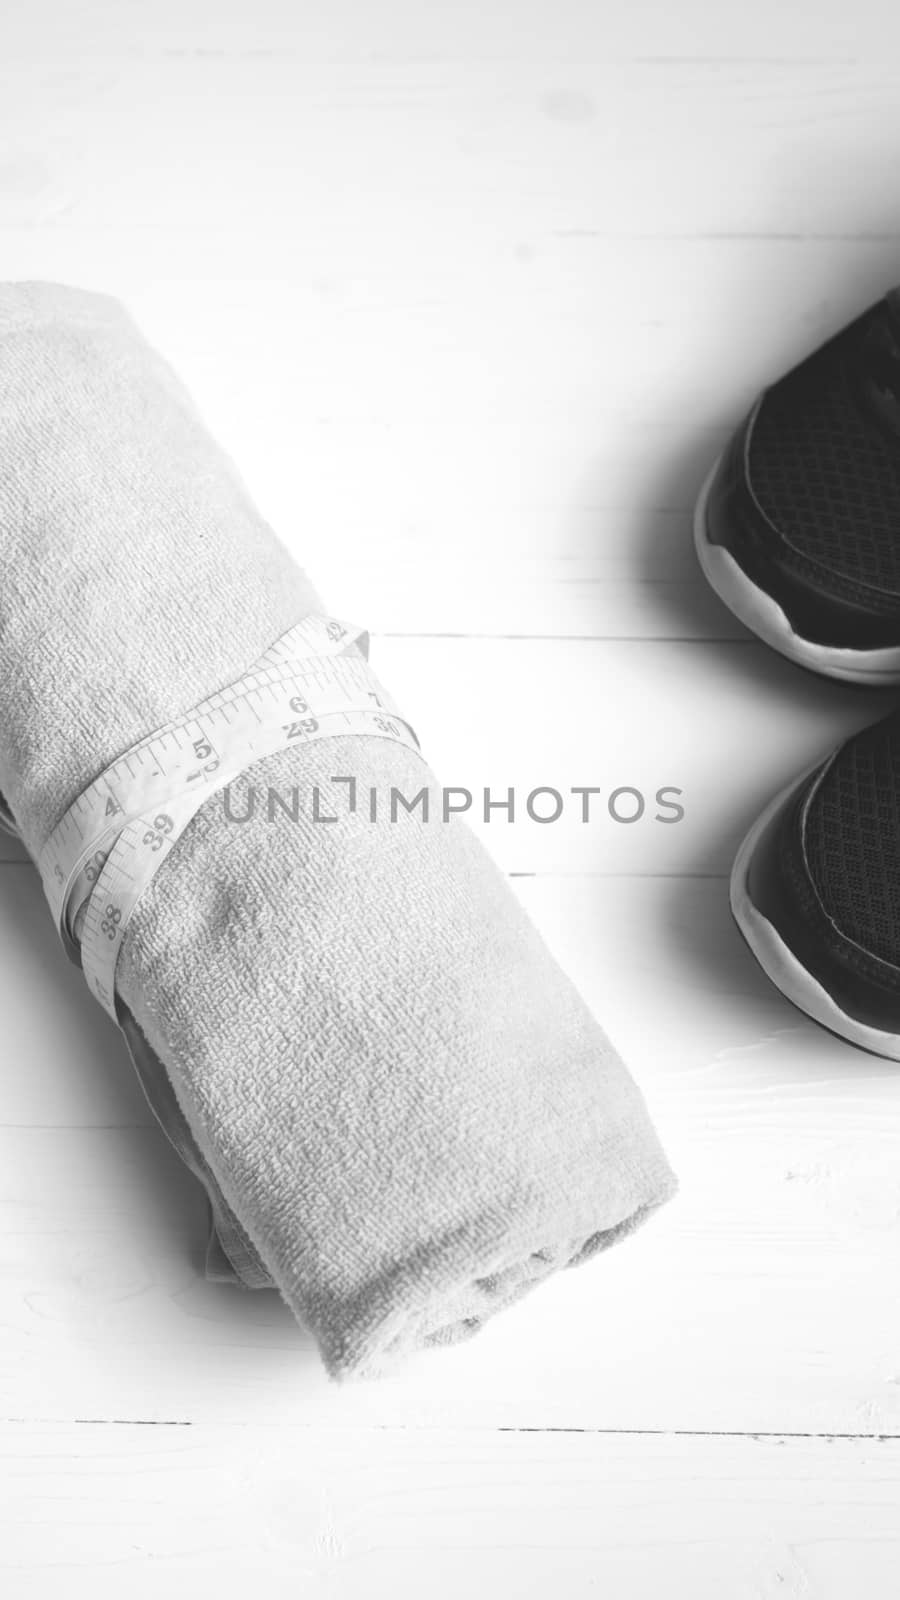 fitness equipment : running shoes,towel and measuring tape on white wood table black and white color style